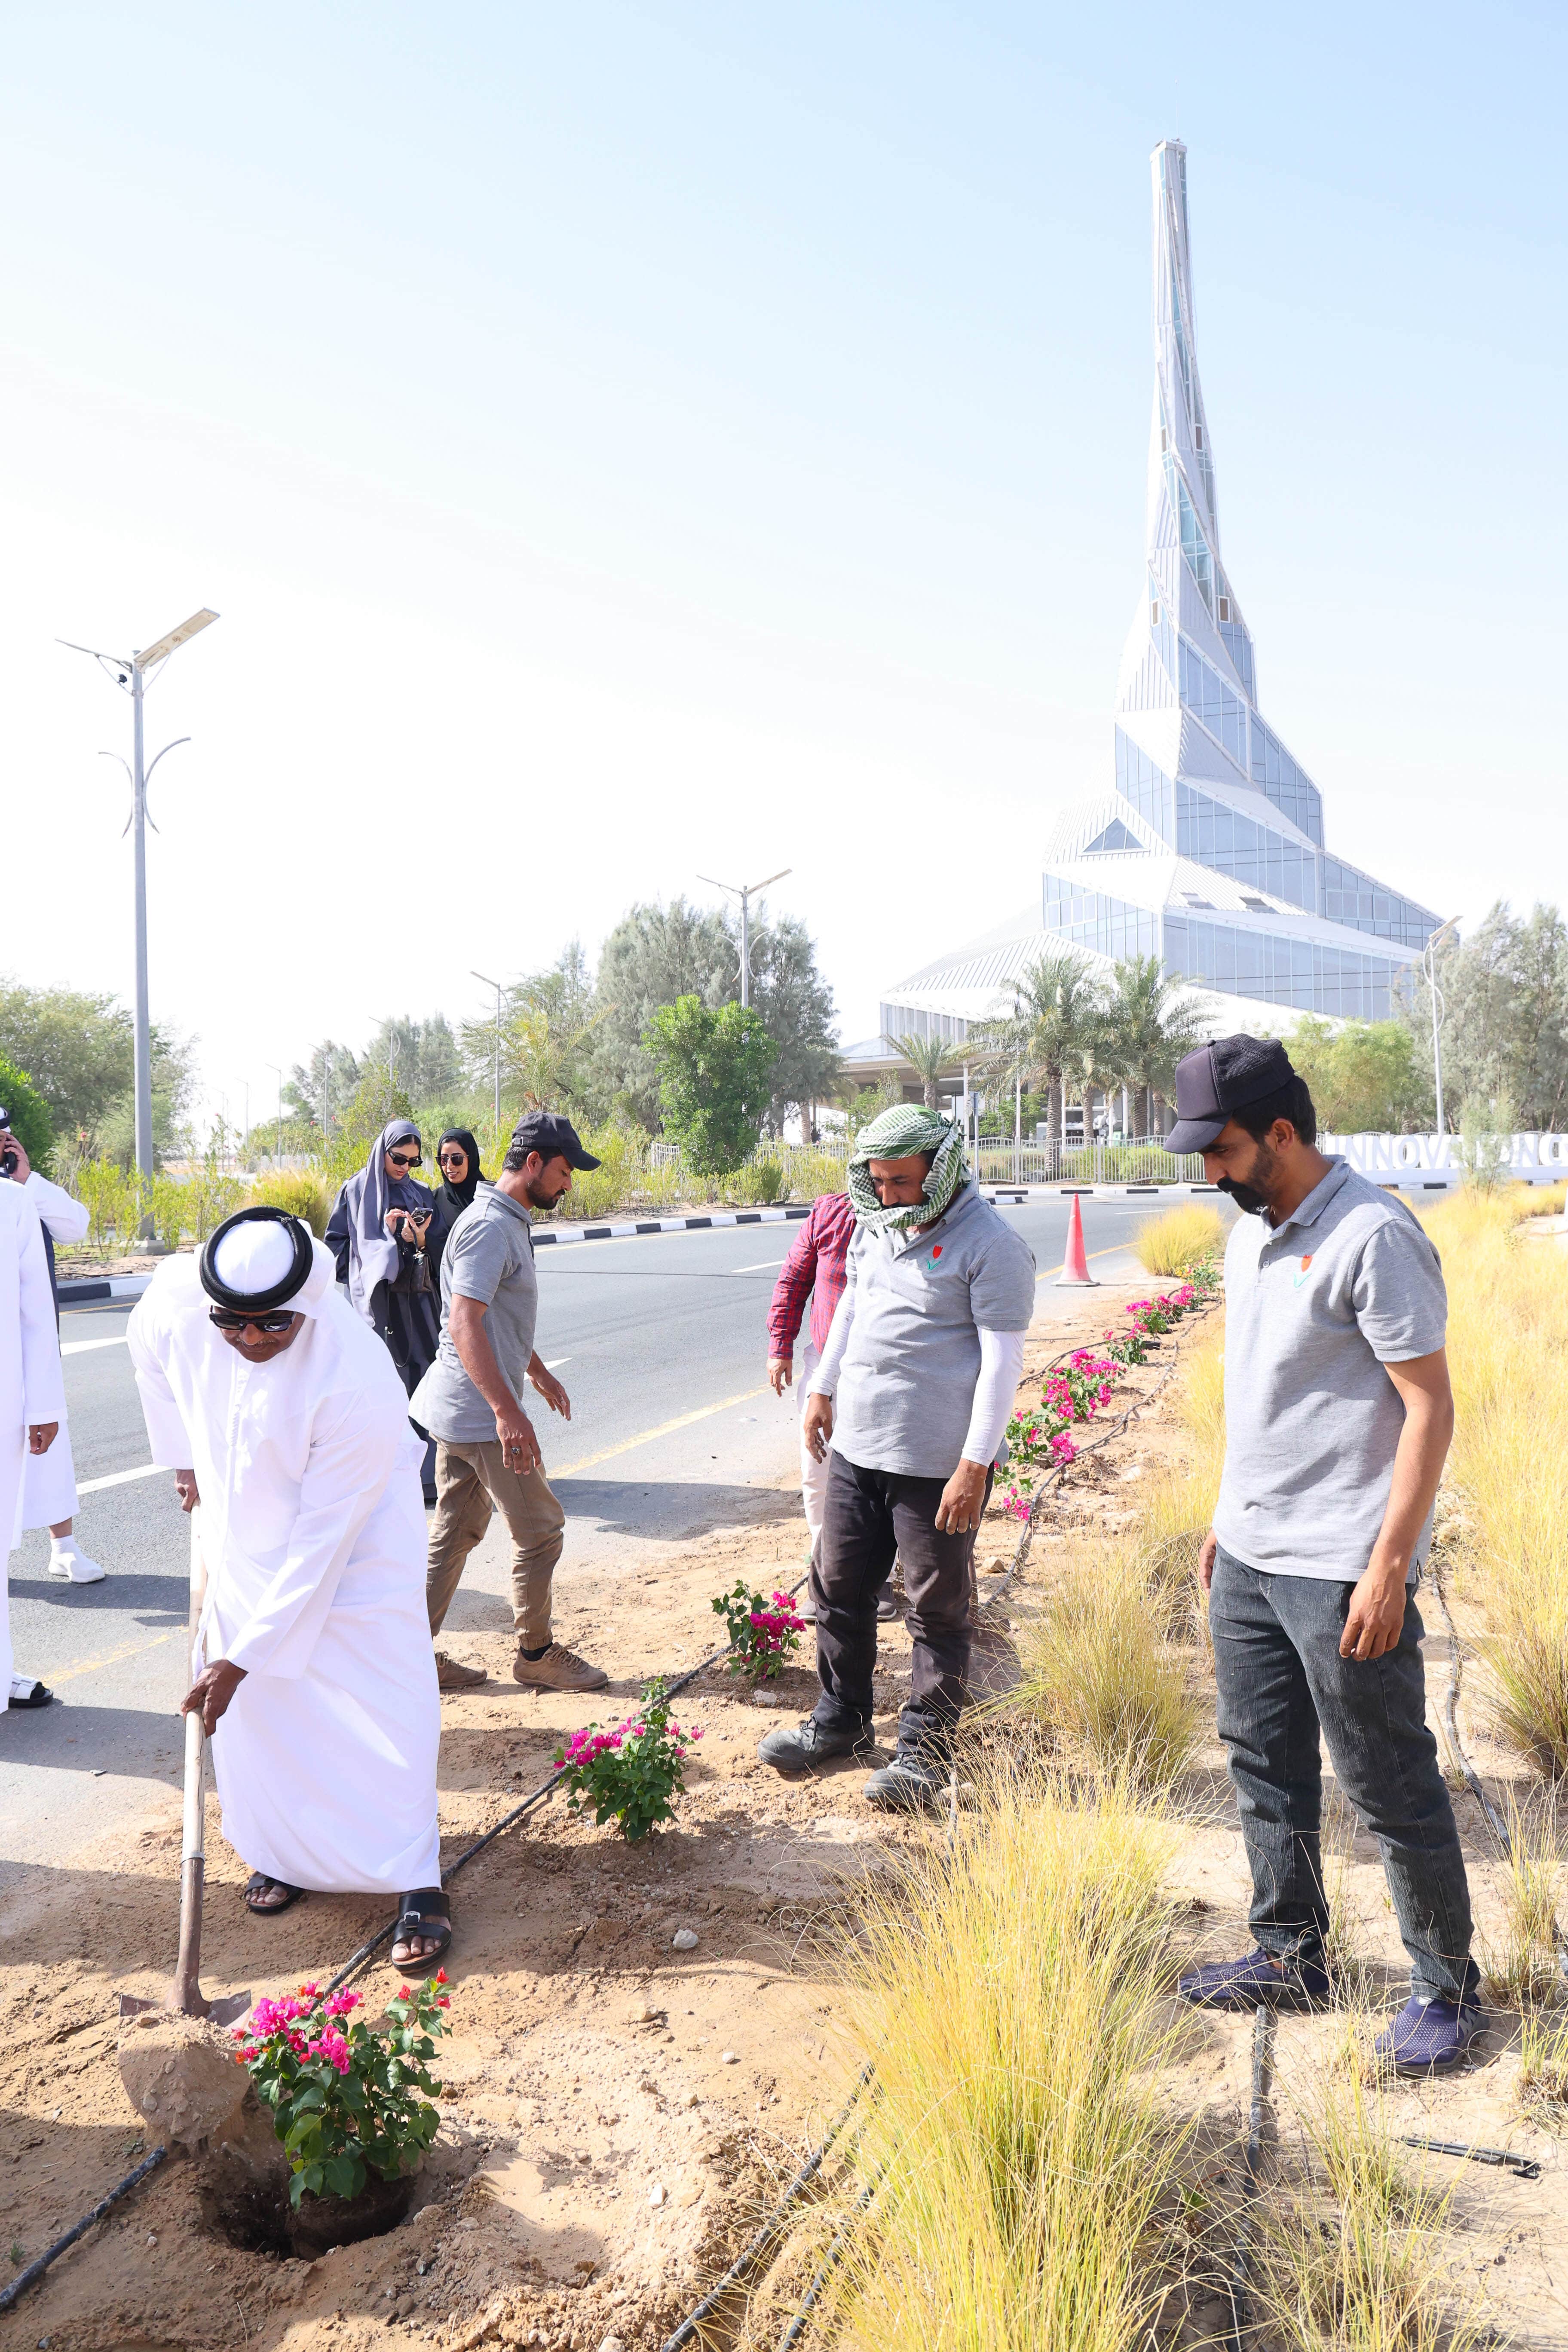 DEWA promotes the UAE’s journey that is rich with sustainable practices